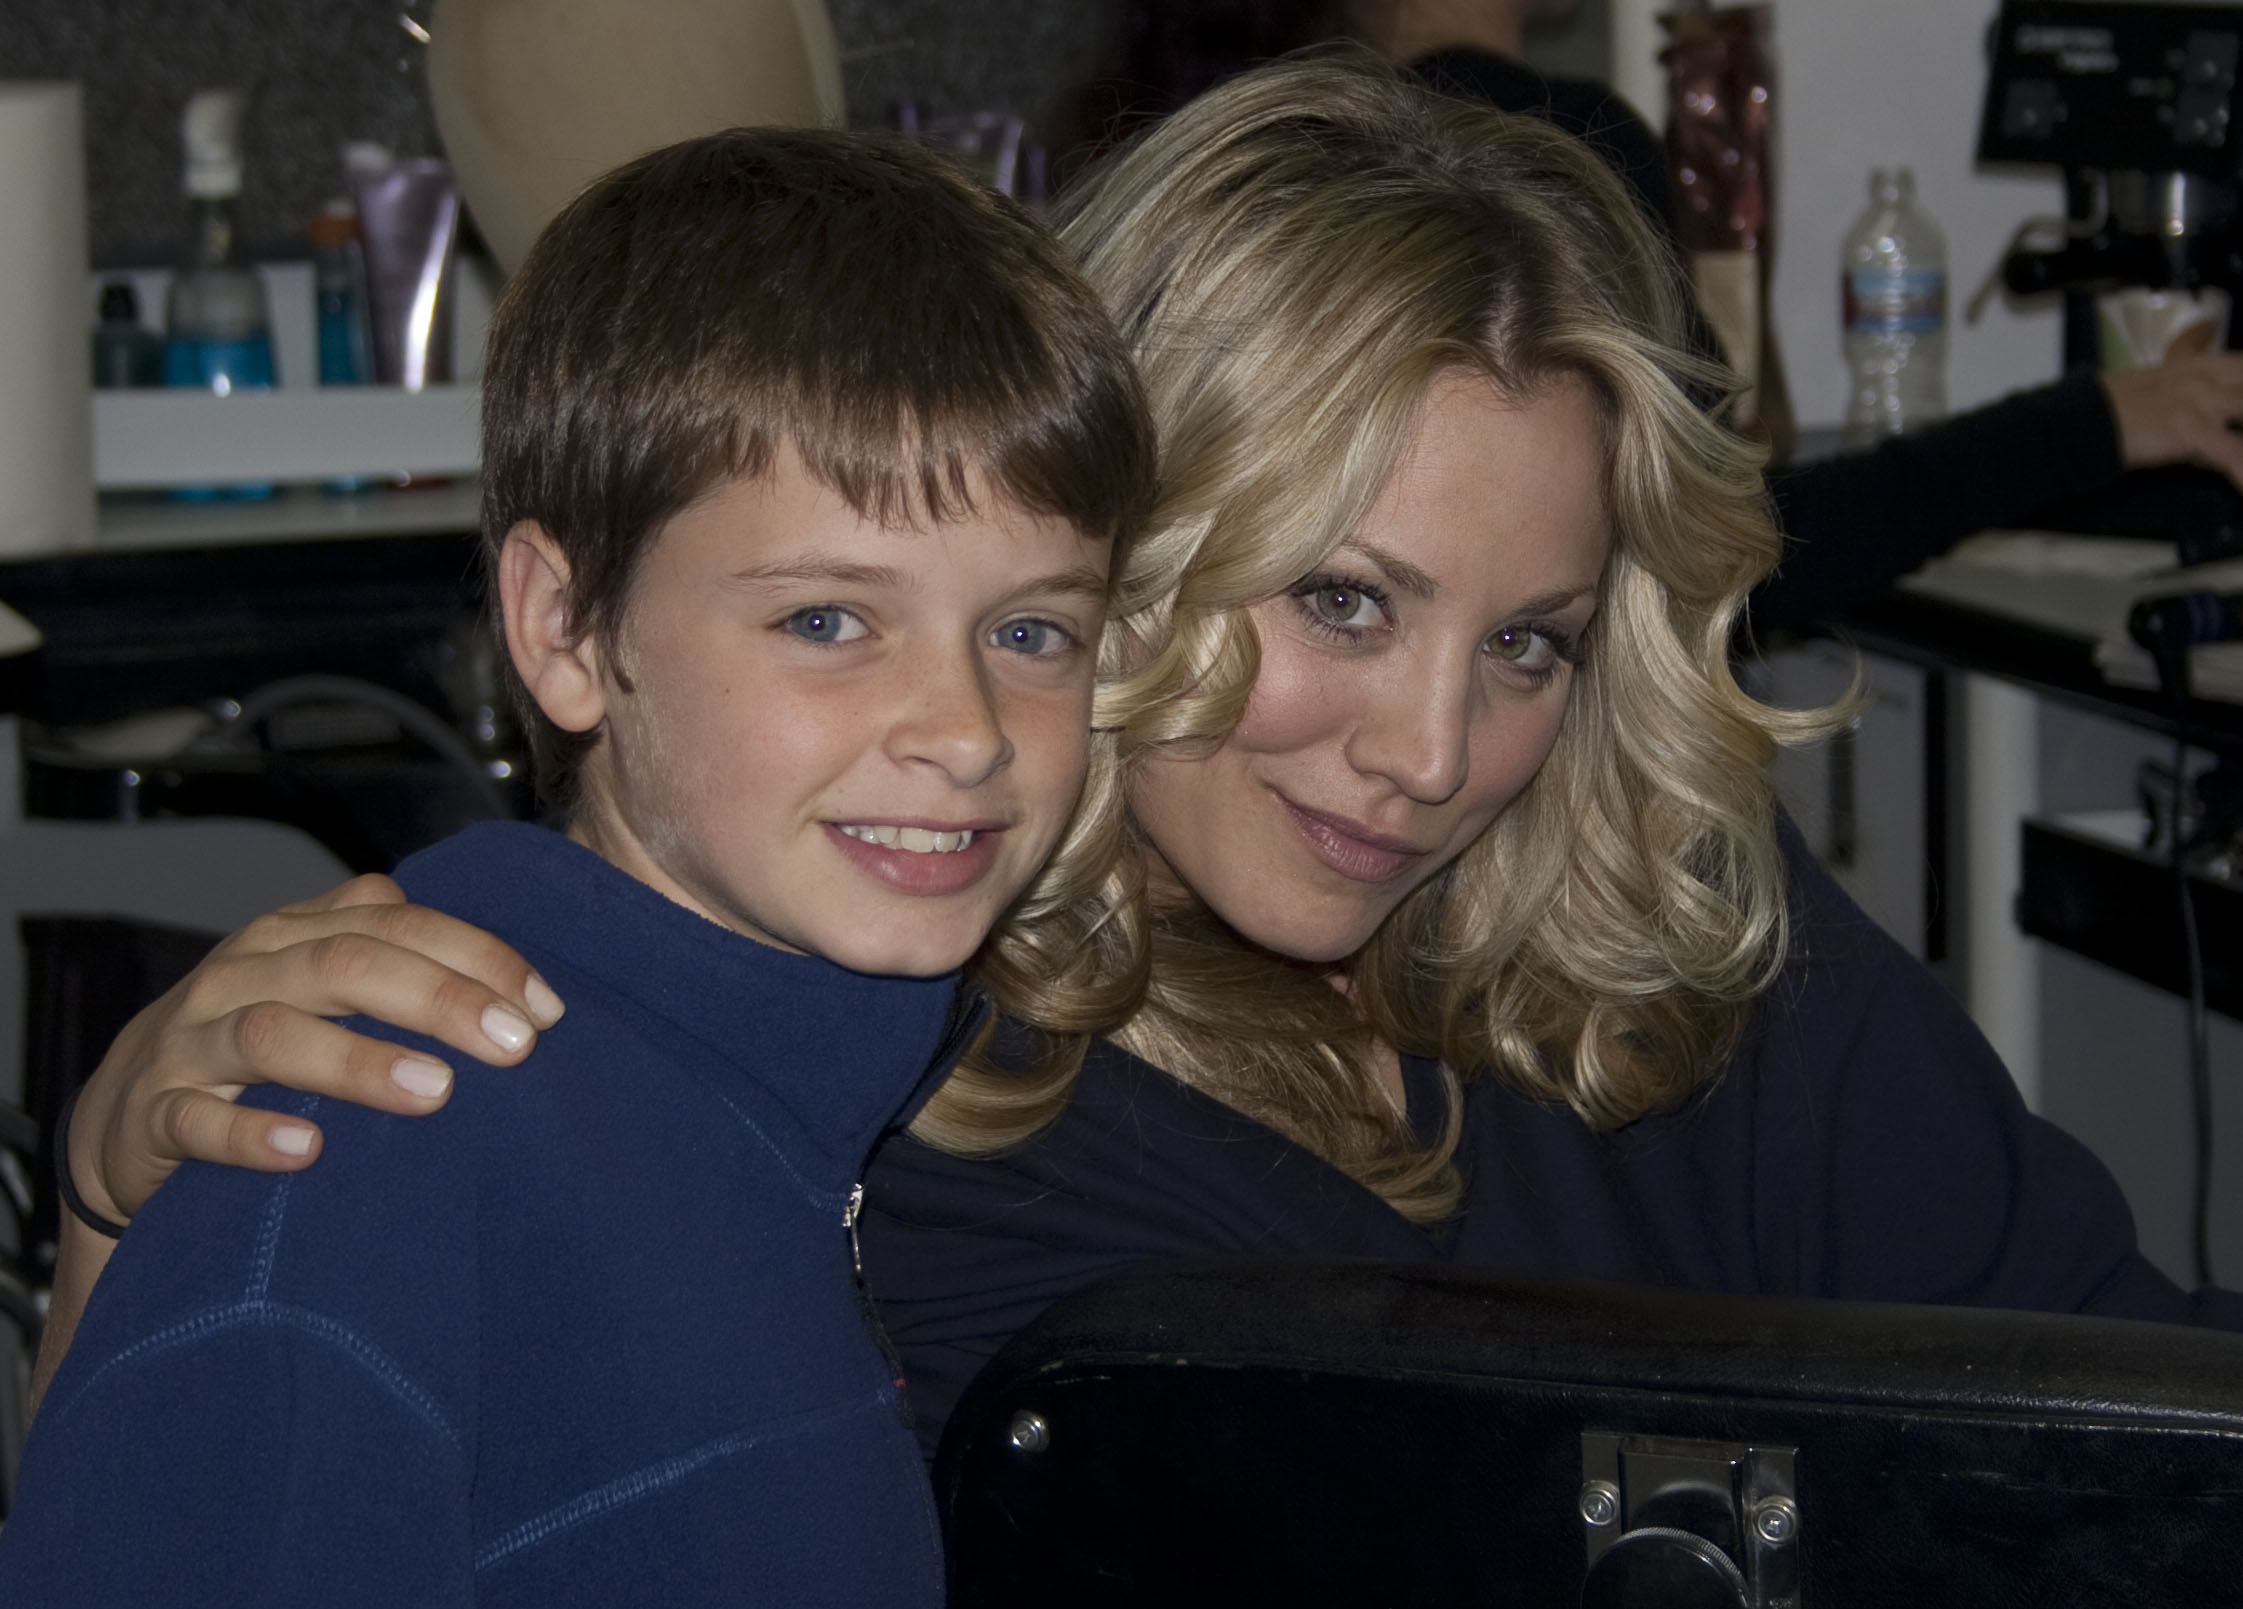 Coleton on the set of HOP with actress Kaley Cuoco.